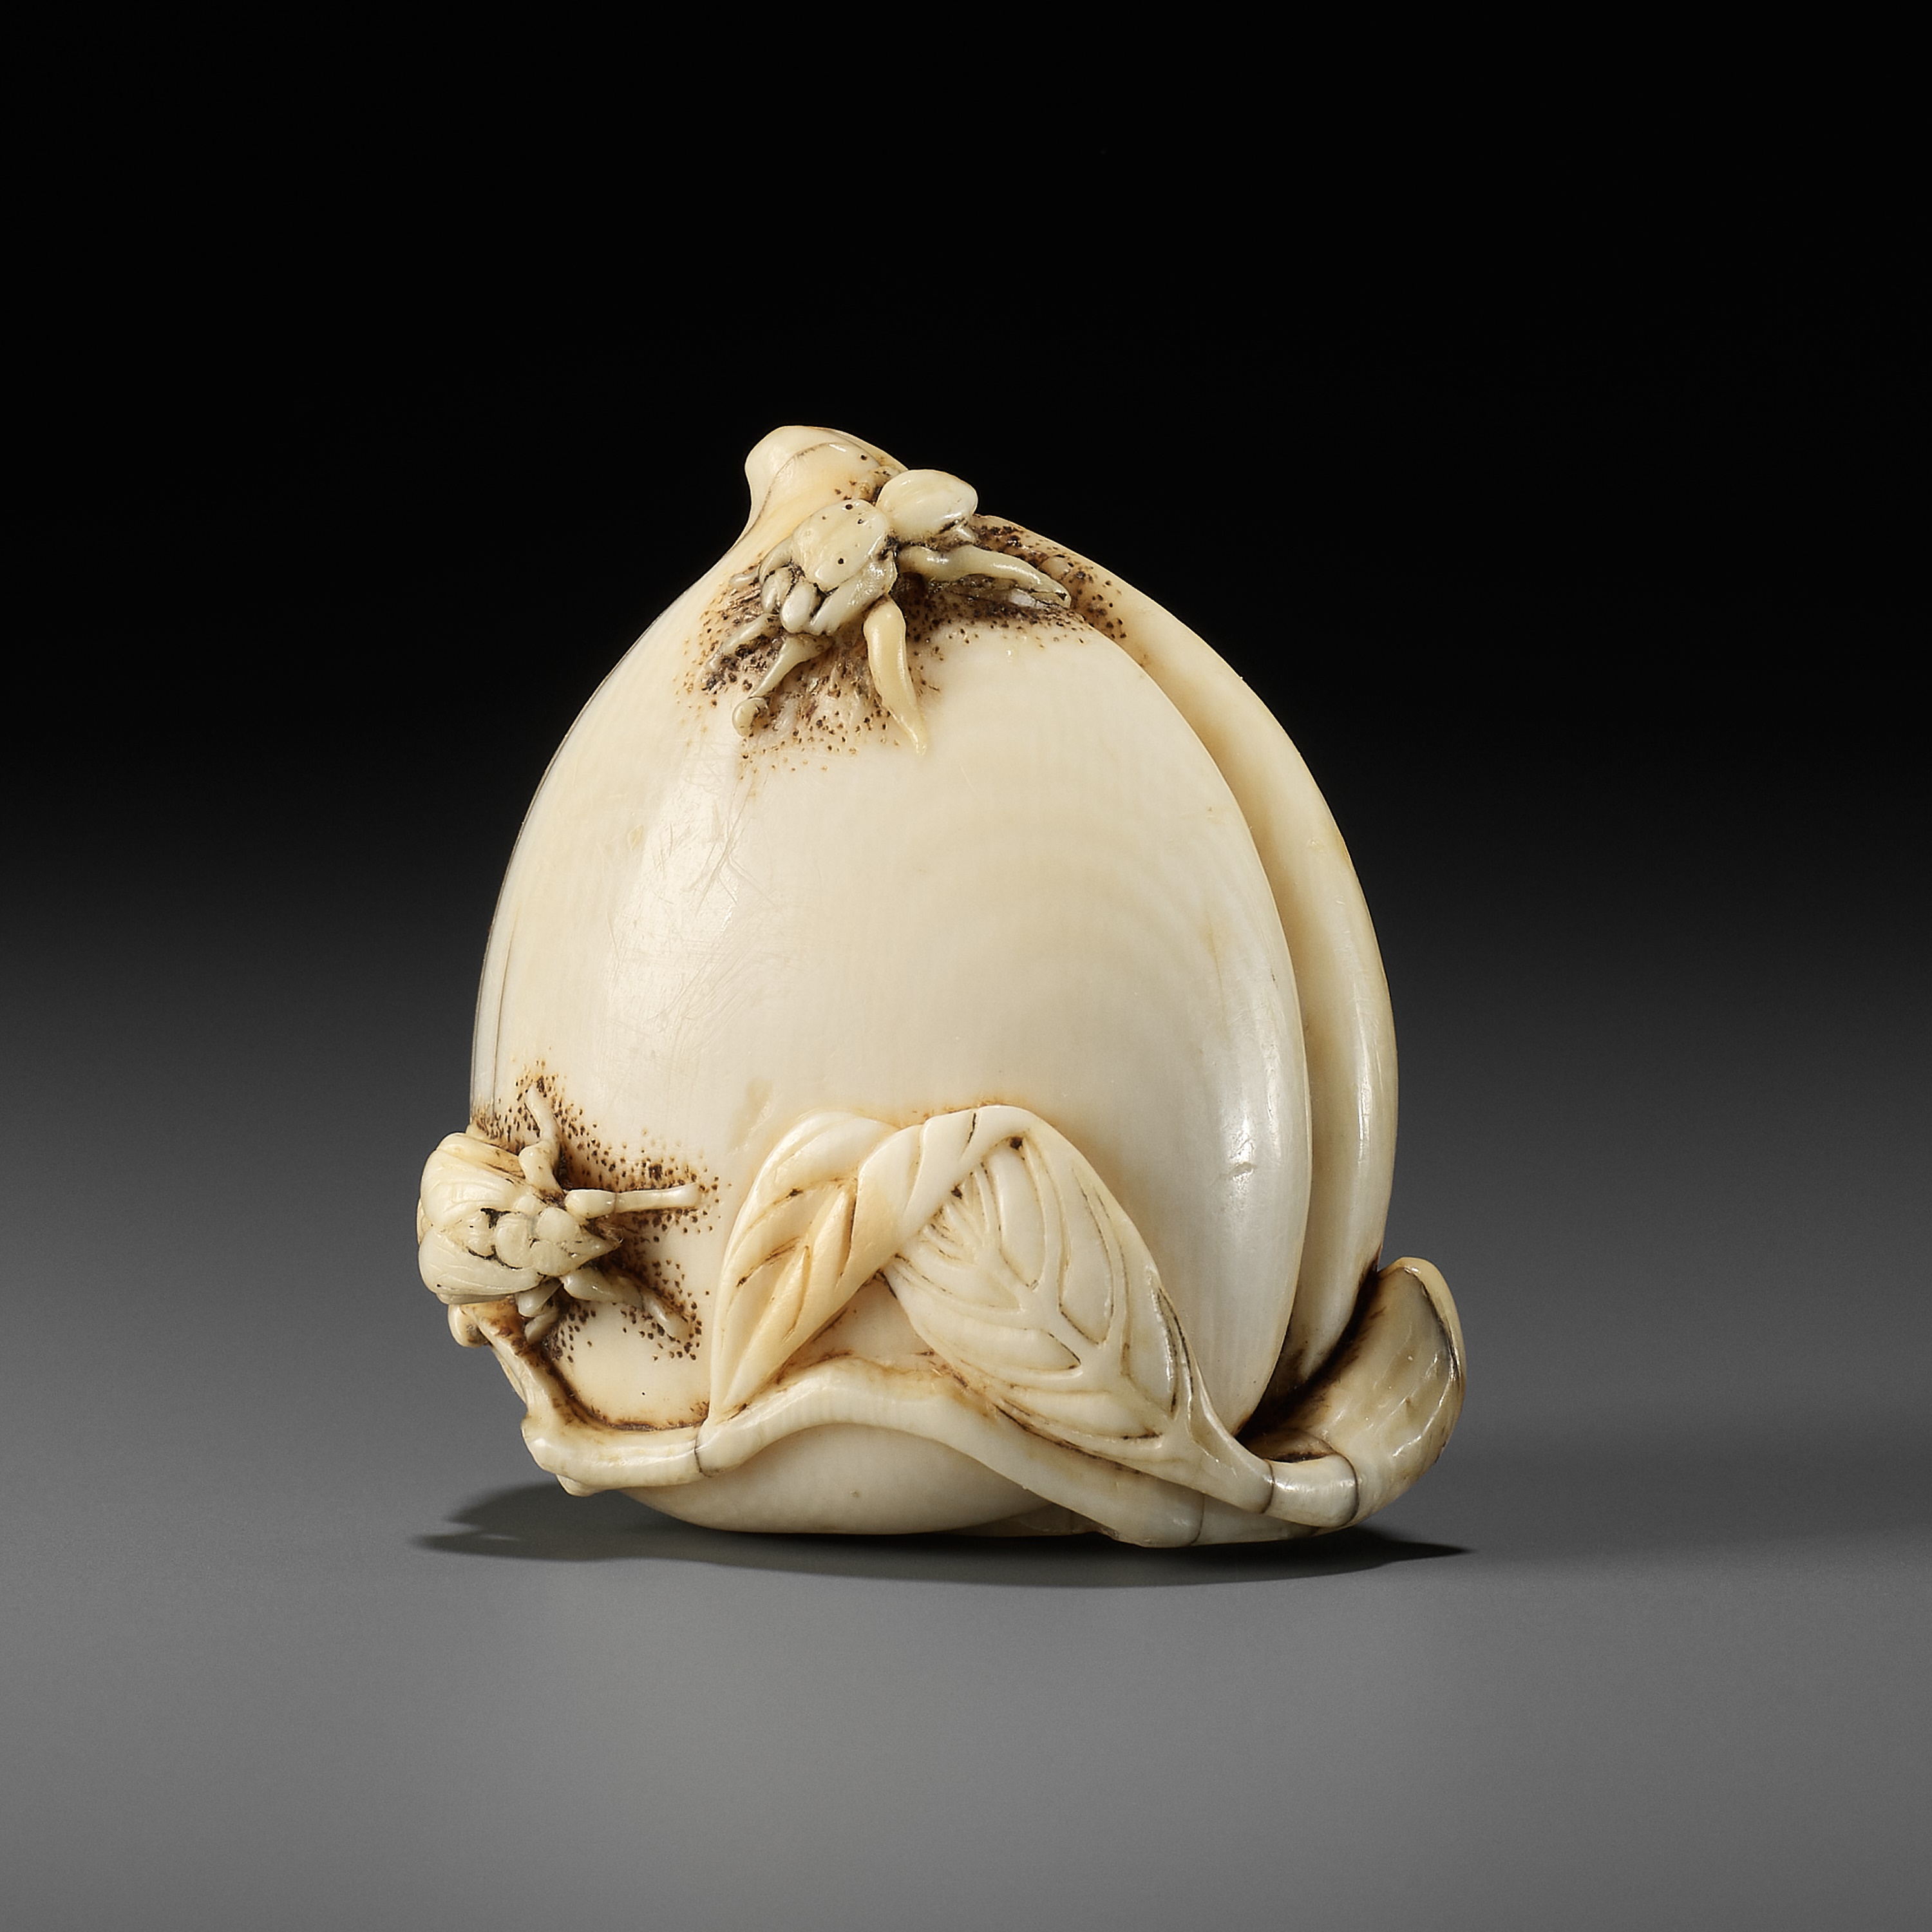 AN IVORY NETSUKE OF A PEACH WITH INSECTS